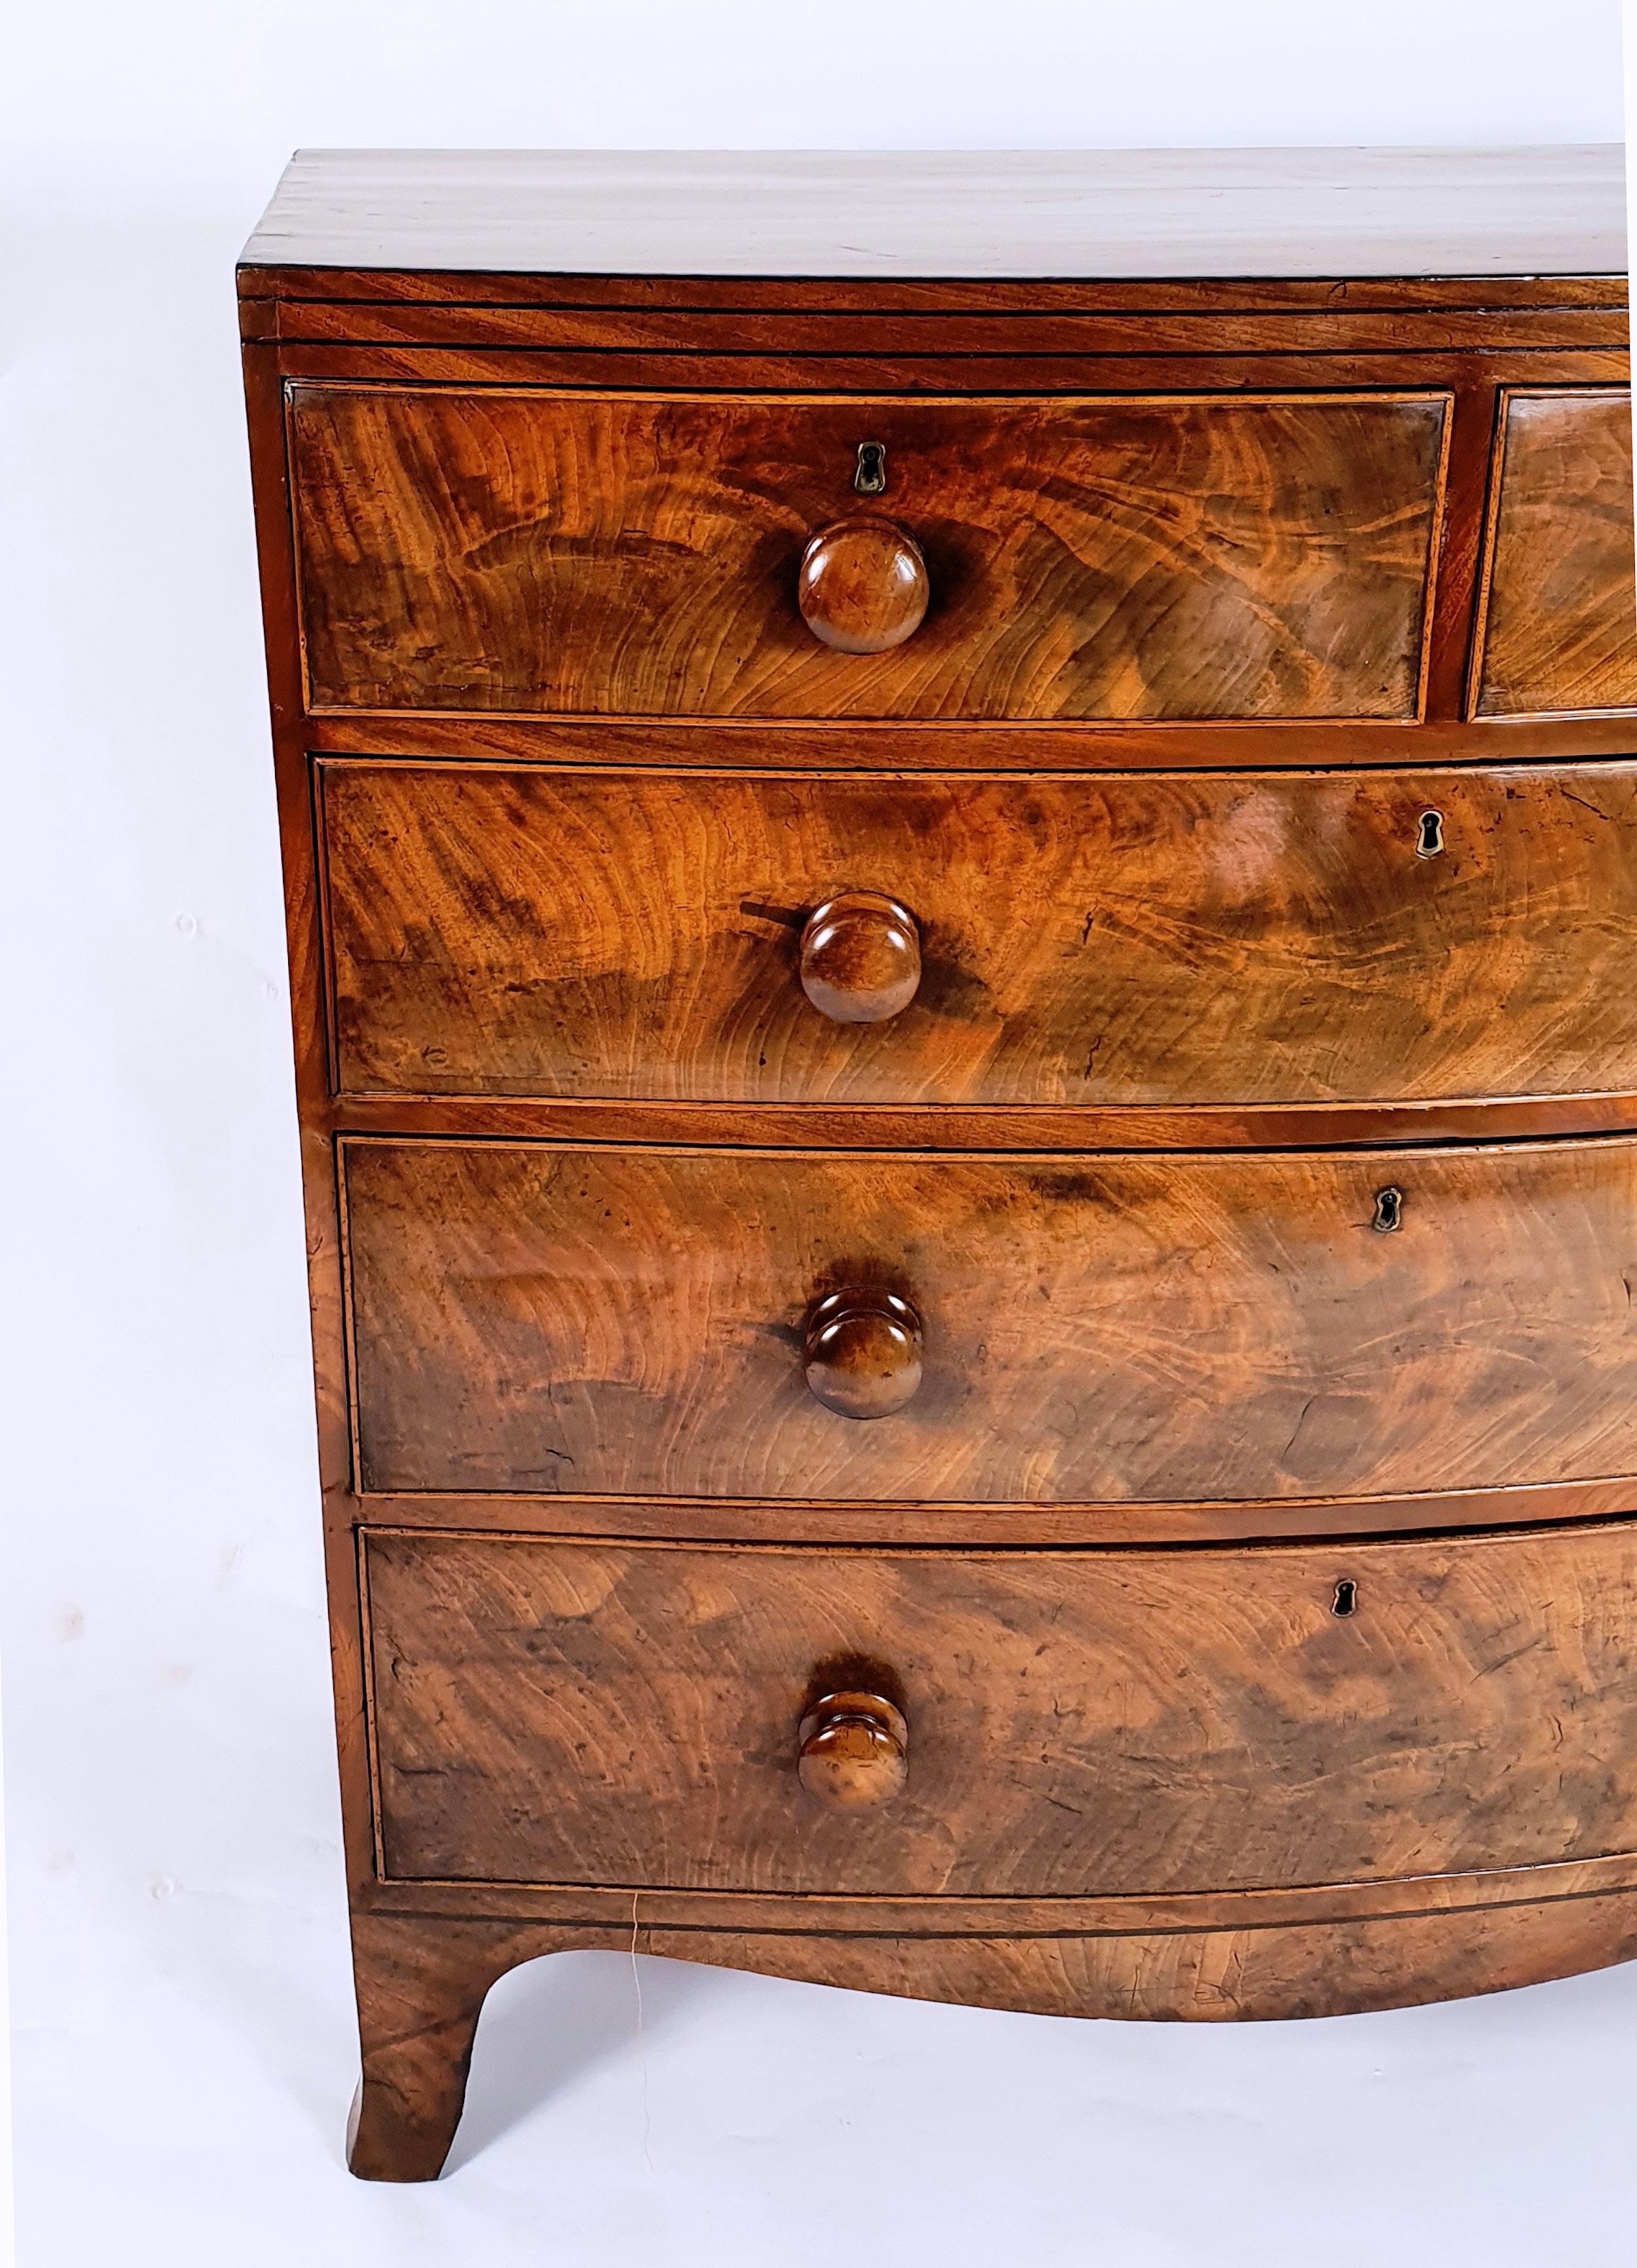 A beautiful and well-proportioned early 19th century English flame mahogany bow fronted chest of drawers that features 2 short over 3 long graduating drawers. The chest has ebony line inlay work and also has the original turned wood handles. It